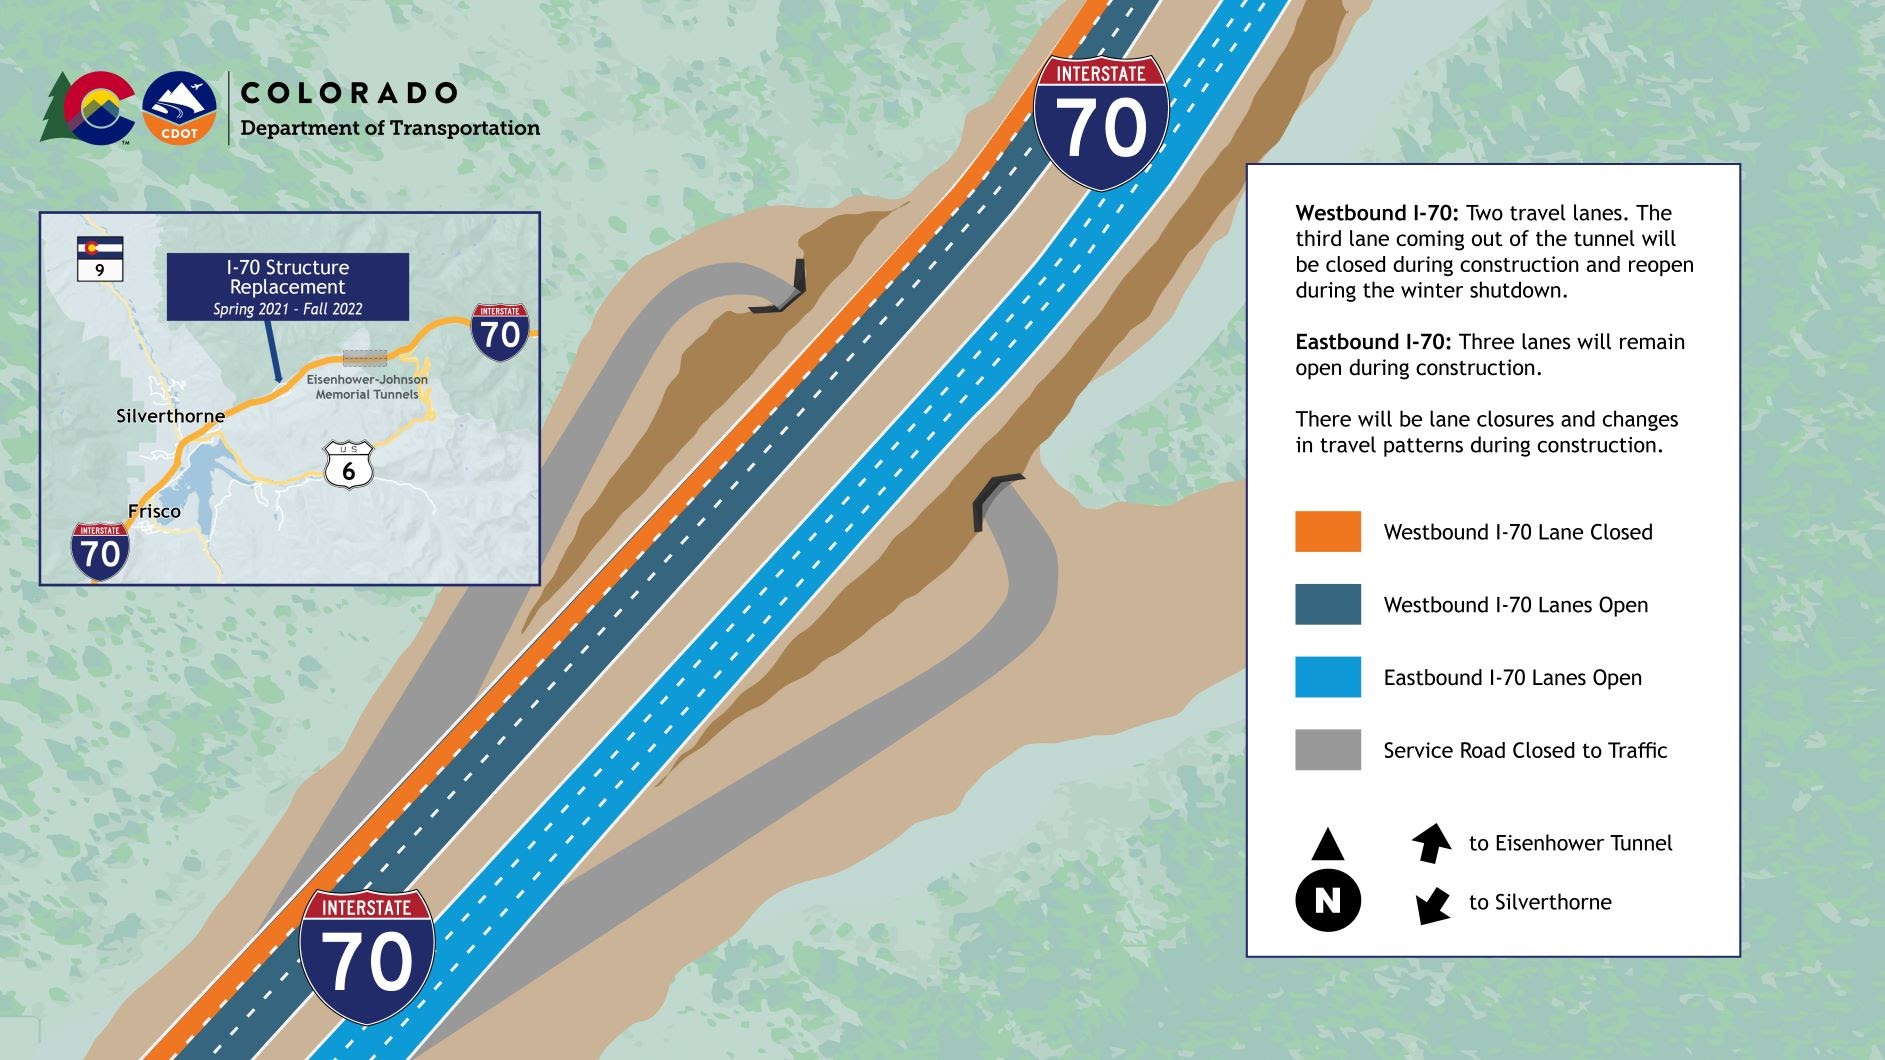 I-70 Structure Replacement project map - Spring 2021 to Fall 2022 - Westbound and Eastbound detail image